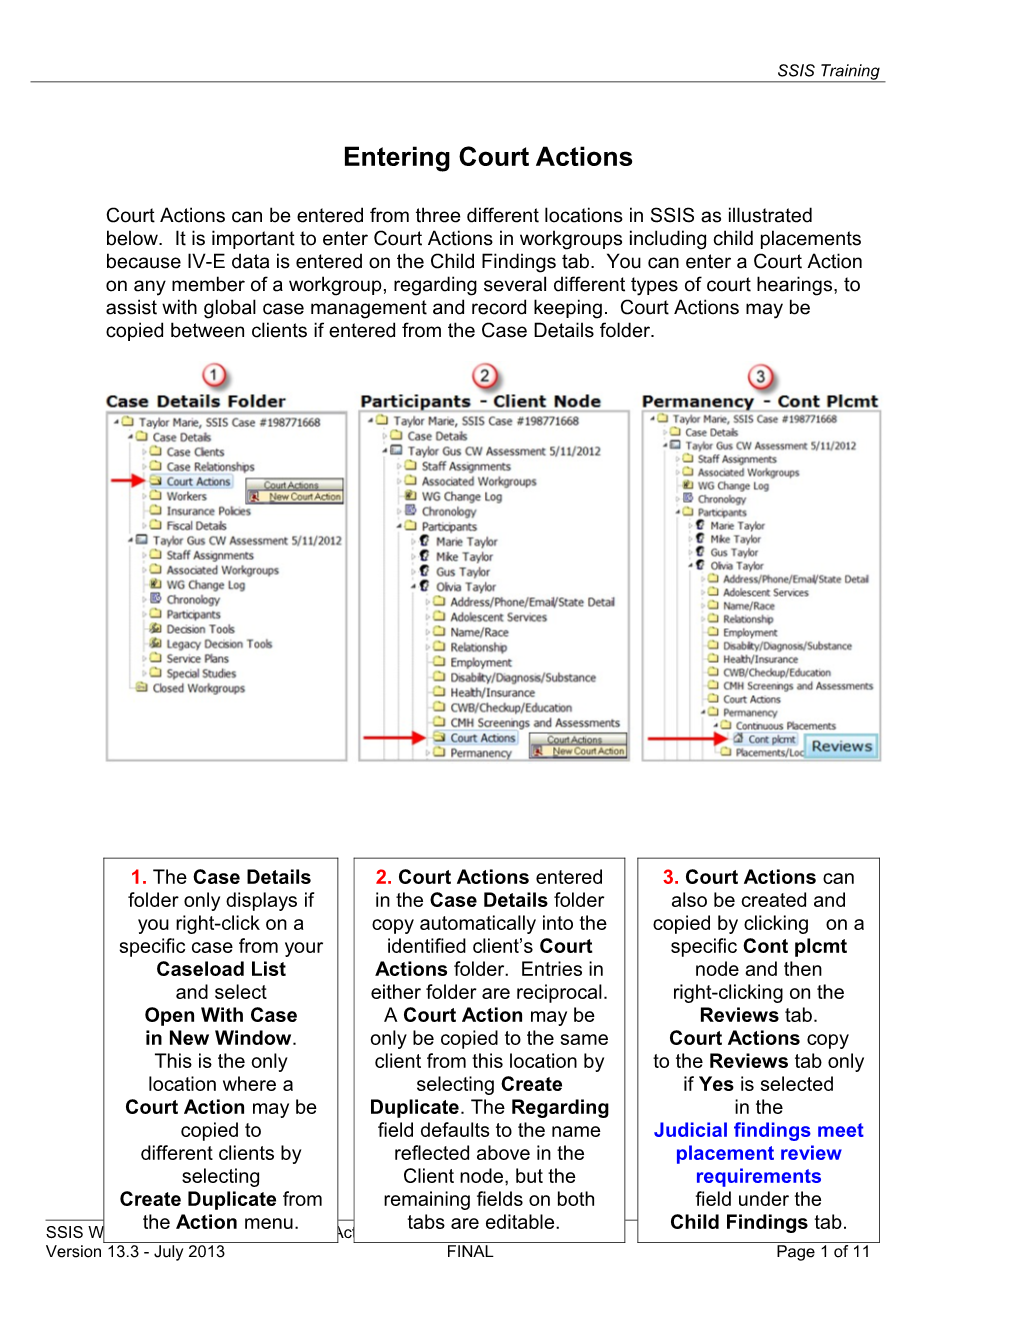 Creating a New Court Action from the Case Details and Participants Folders